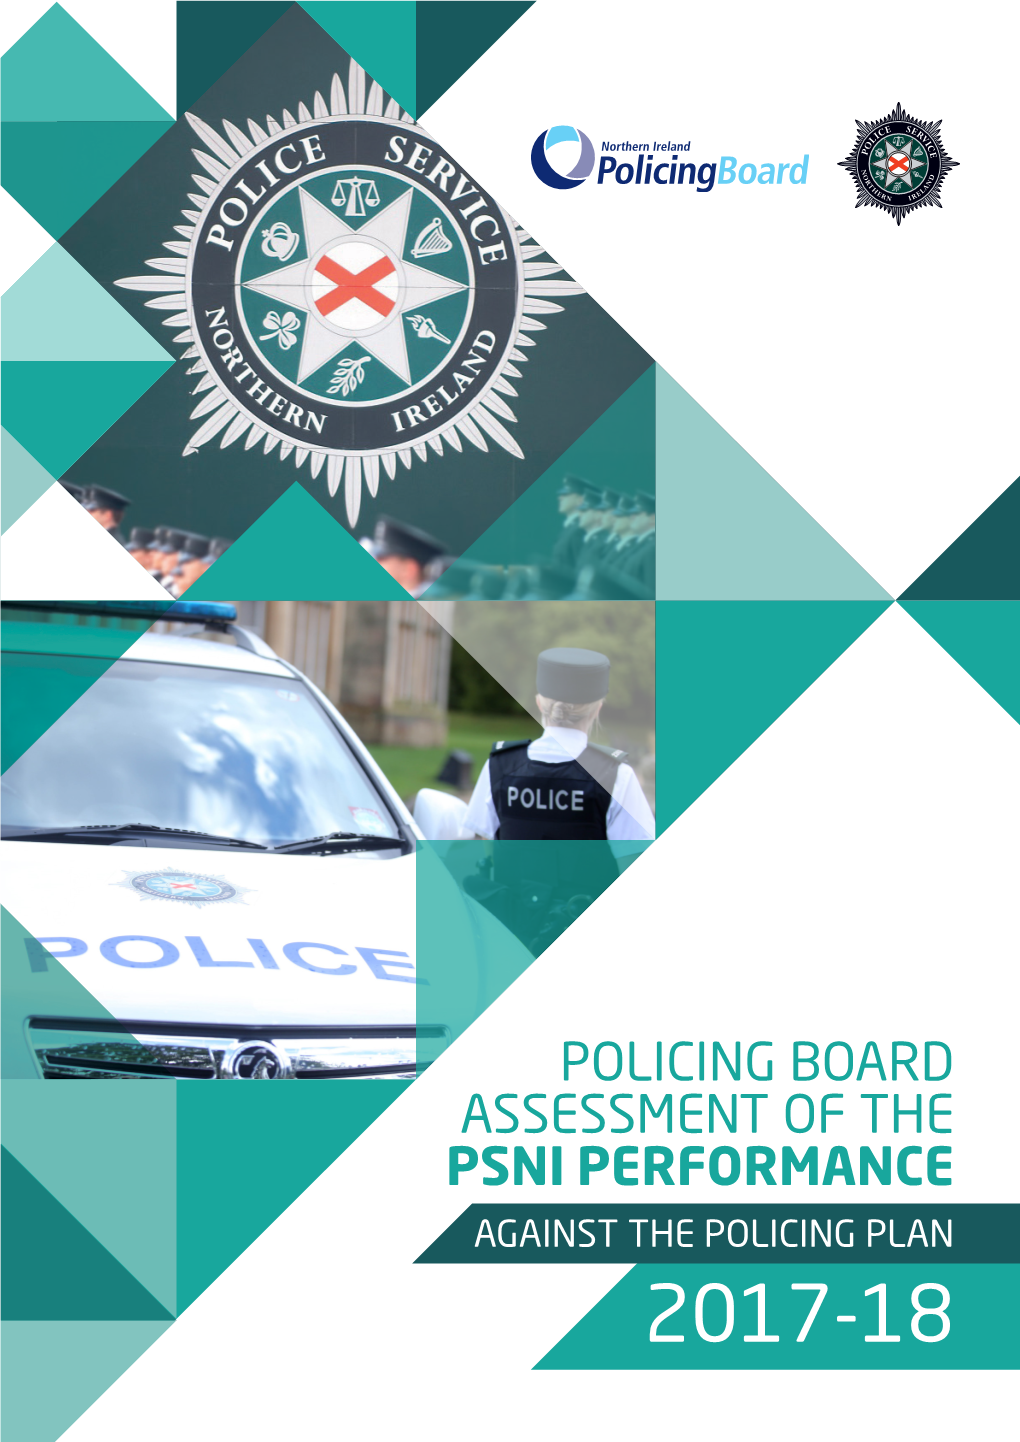 Policing Board Assessment of the Psni Performance Against the Policing Plan 2017-18